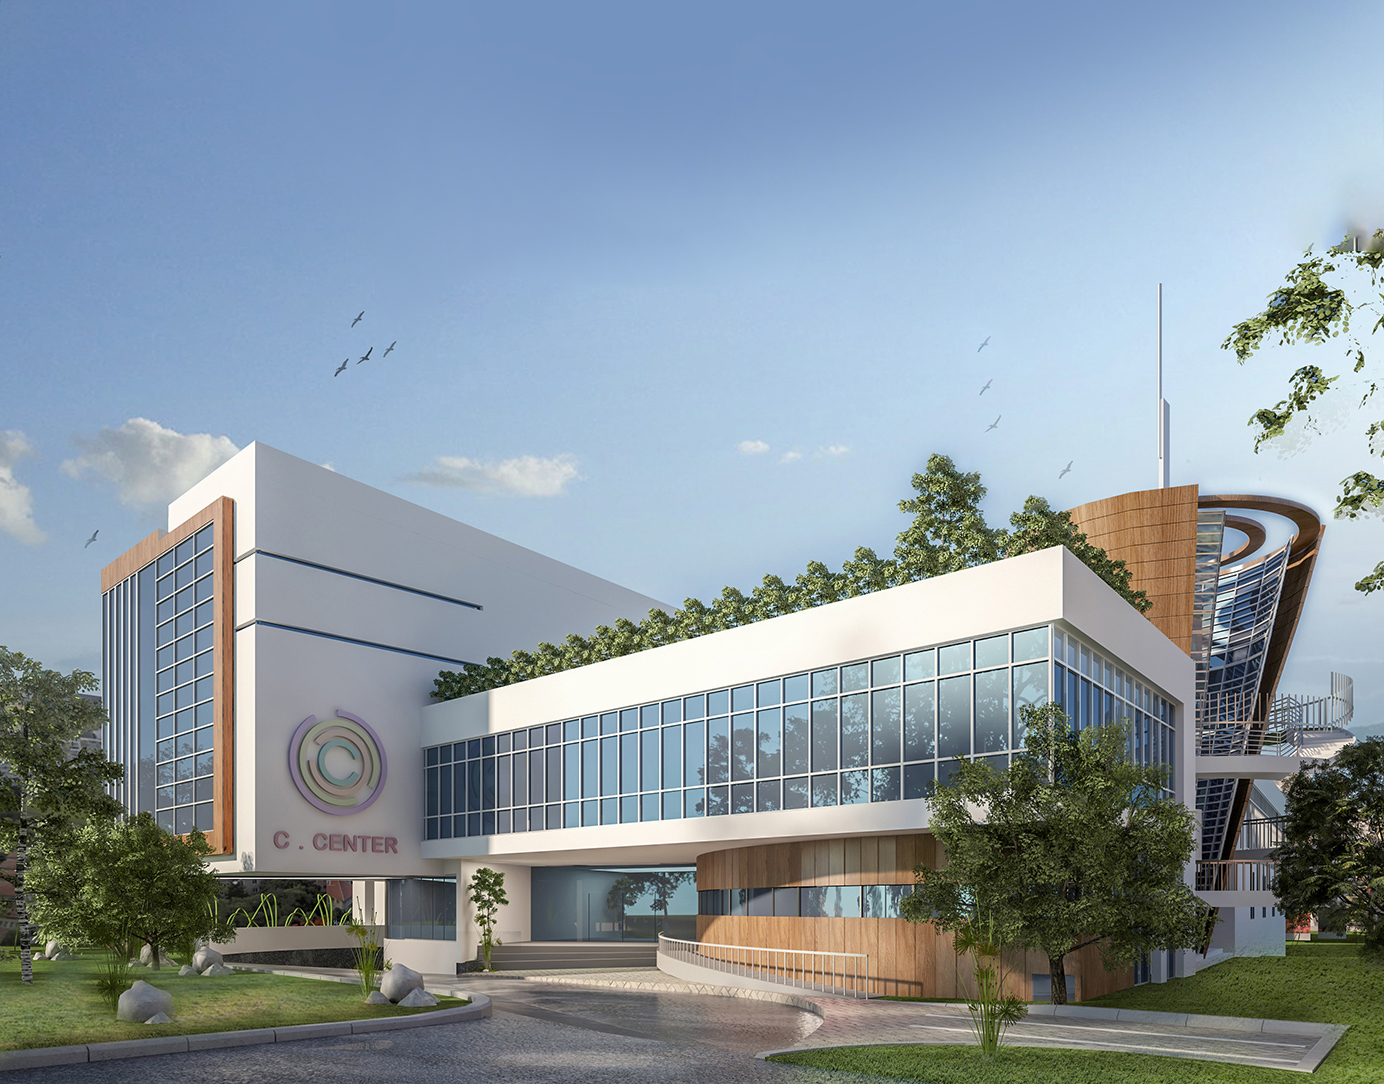 100-bed specialty hospital within a residential suburb.